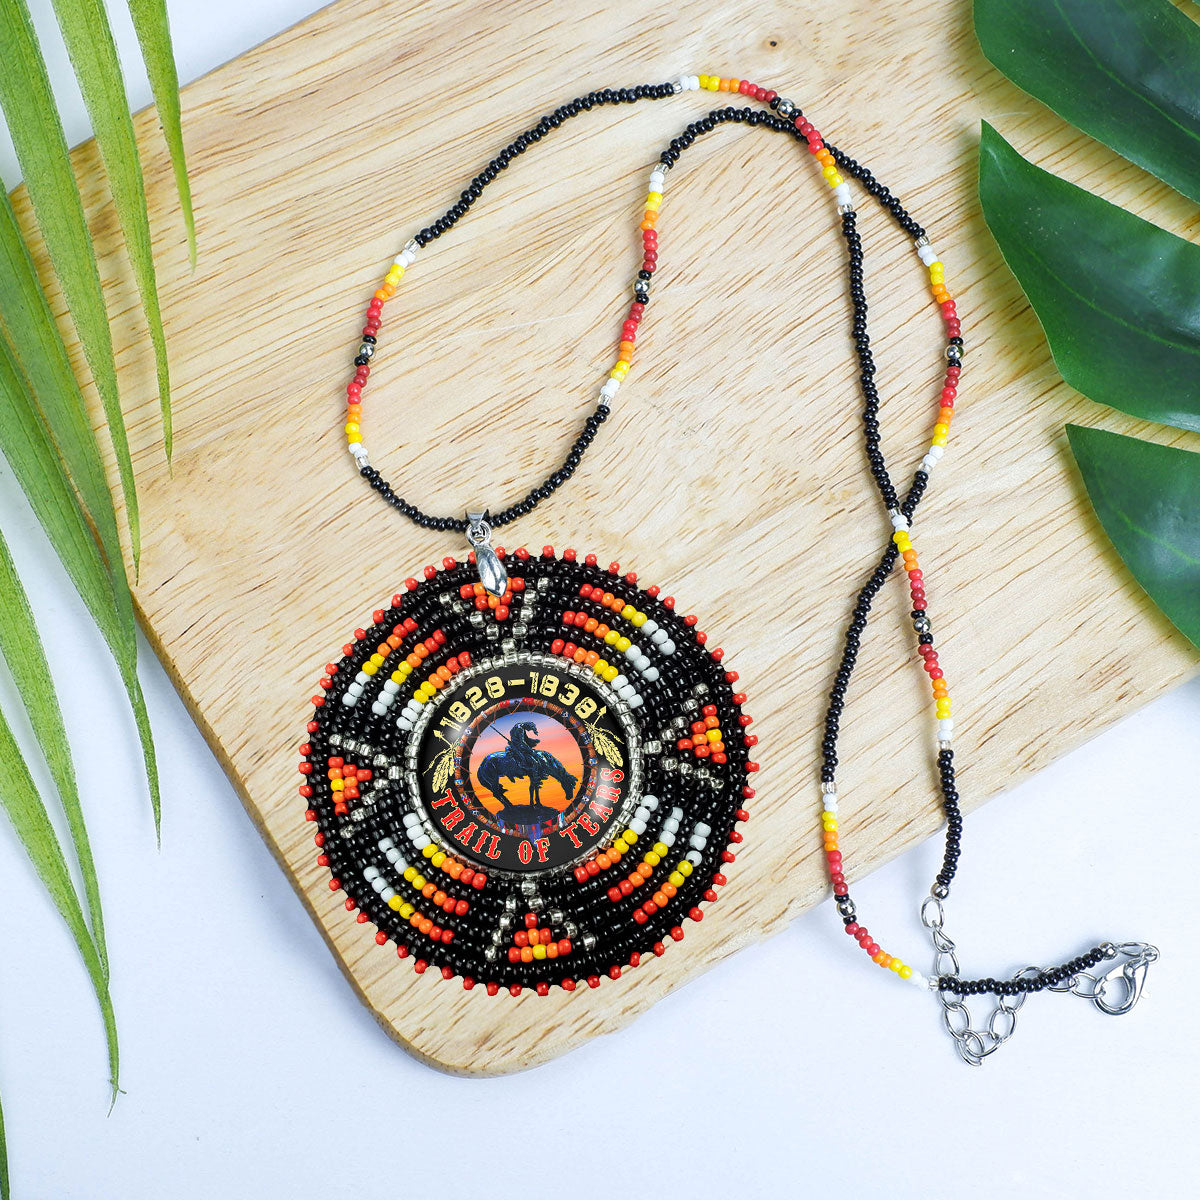 Trail of Tears Beaded Sunburst Handmade Beaded Wire Necklace PendantUnisex With Native American Style